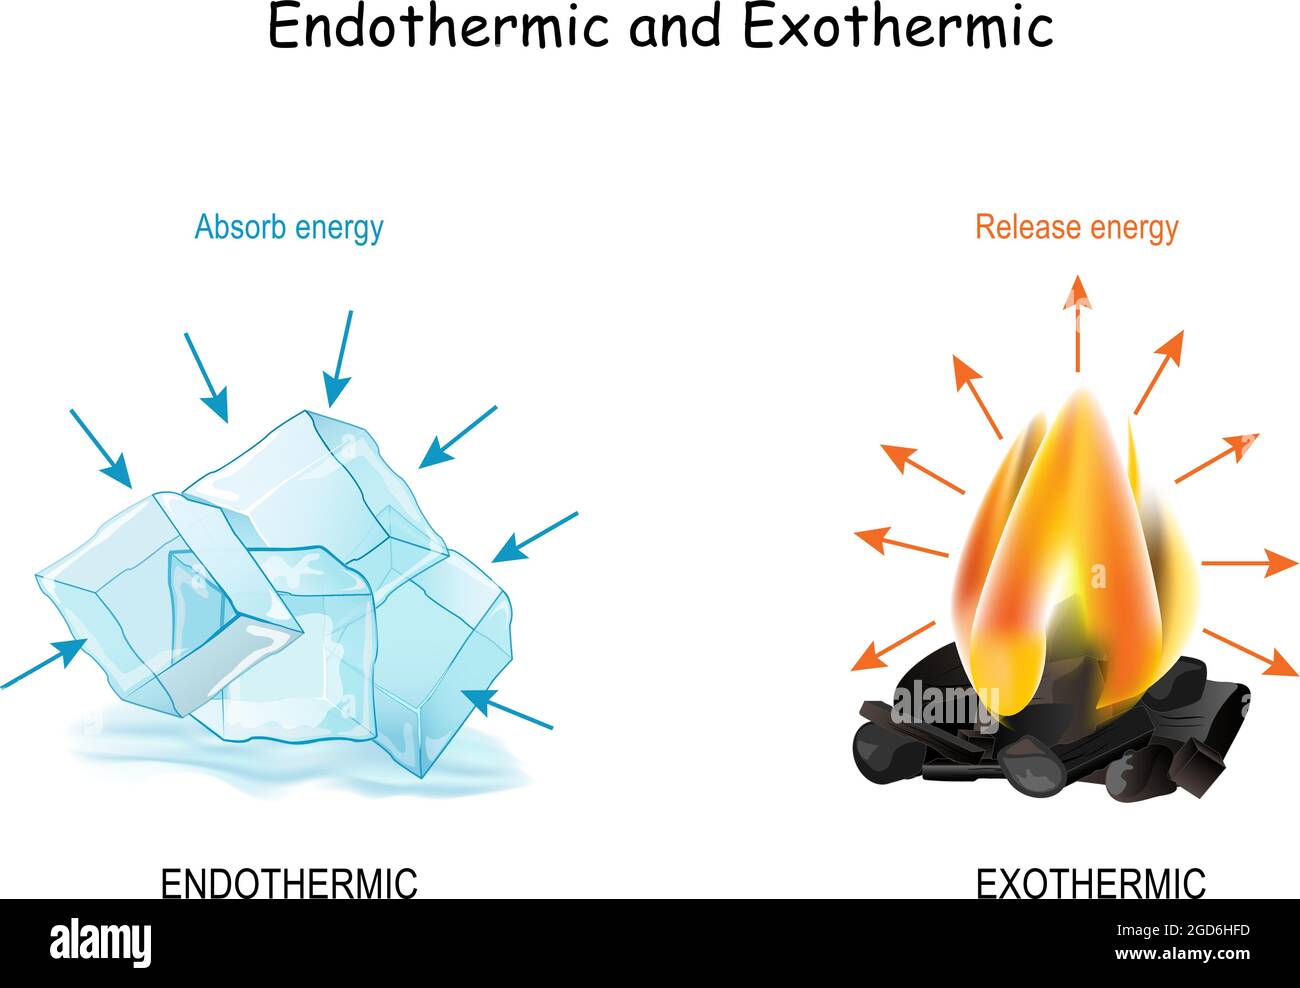 Endothermic and Exothermic chemical reactions. Cold cubes of ice Absorb energy, and hot fire releases energy. Poster Stock Vector